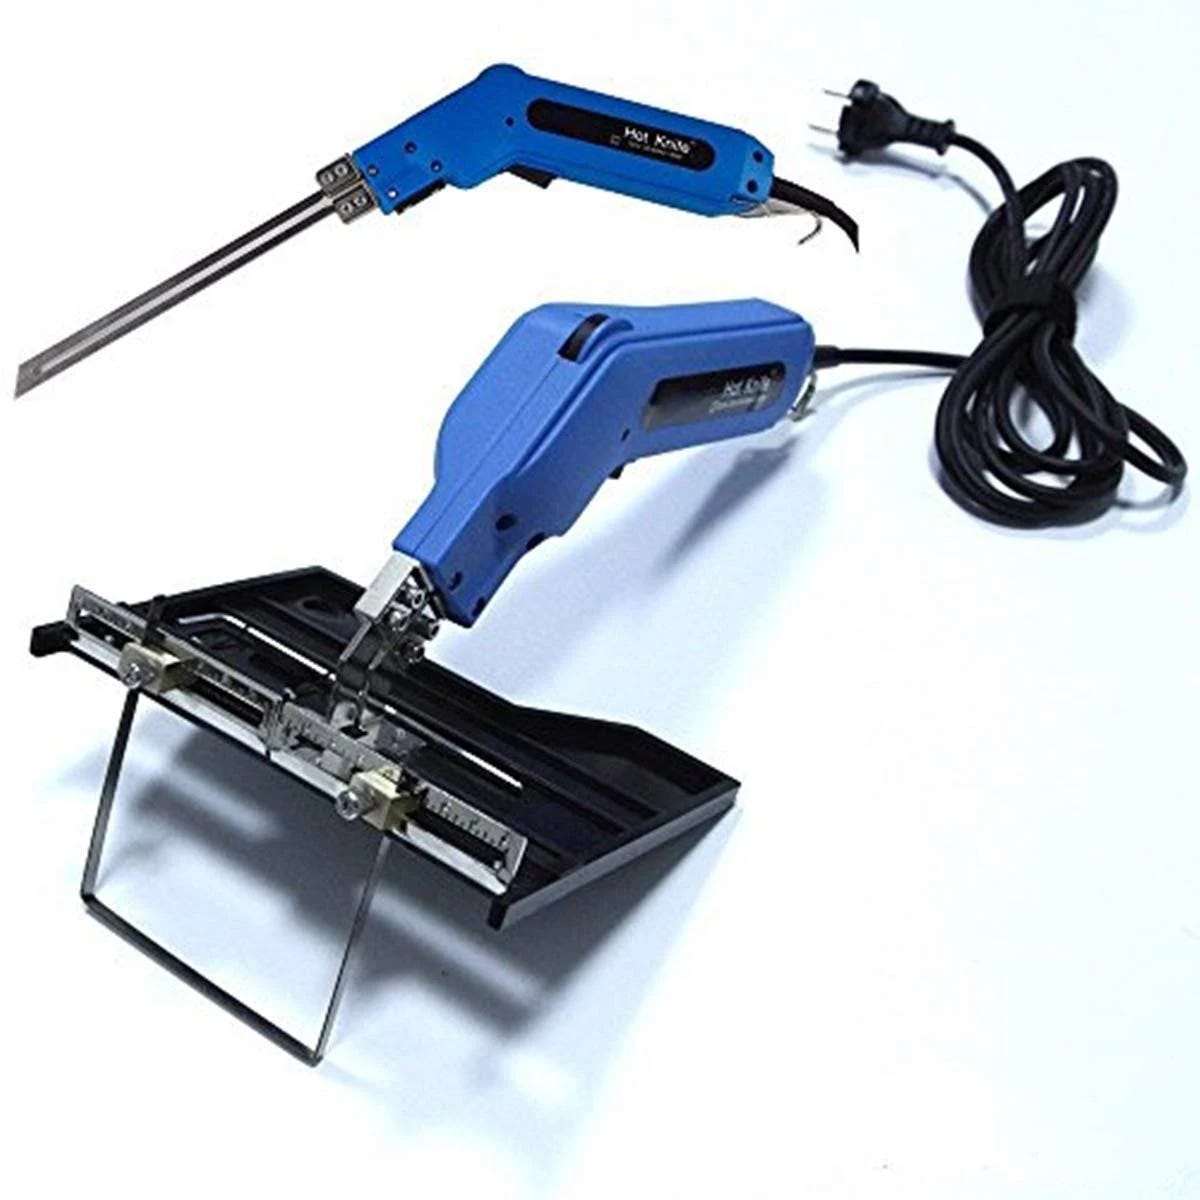 Efficient Electric Foam Cutter with Adjustable Speed | Image